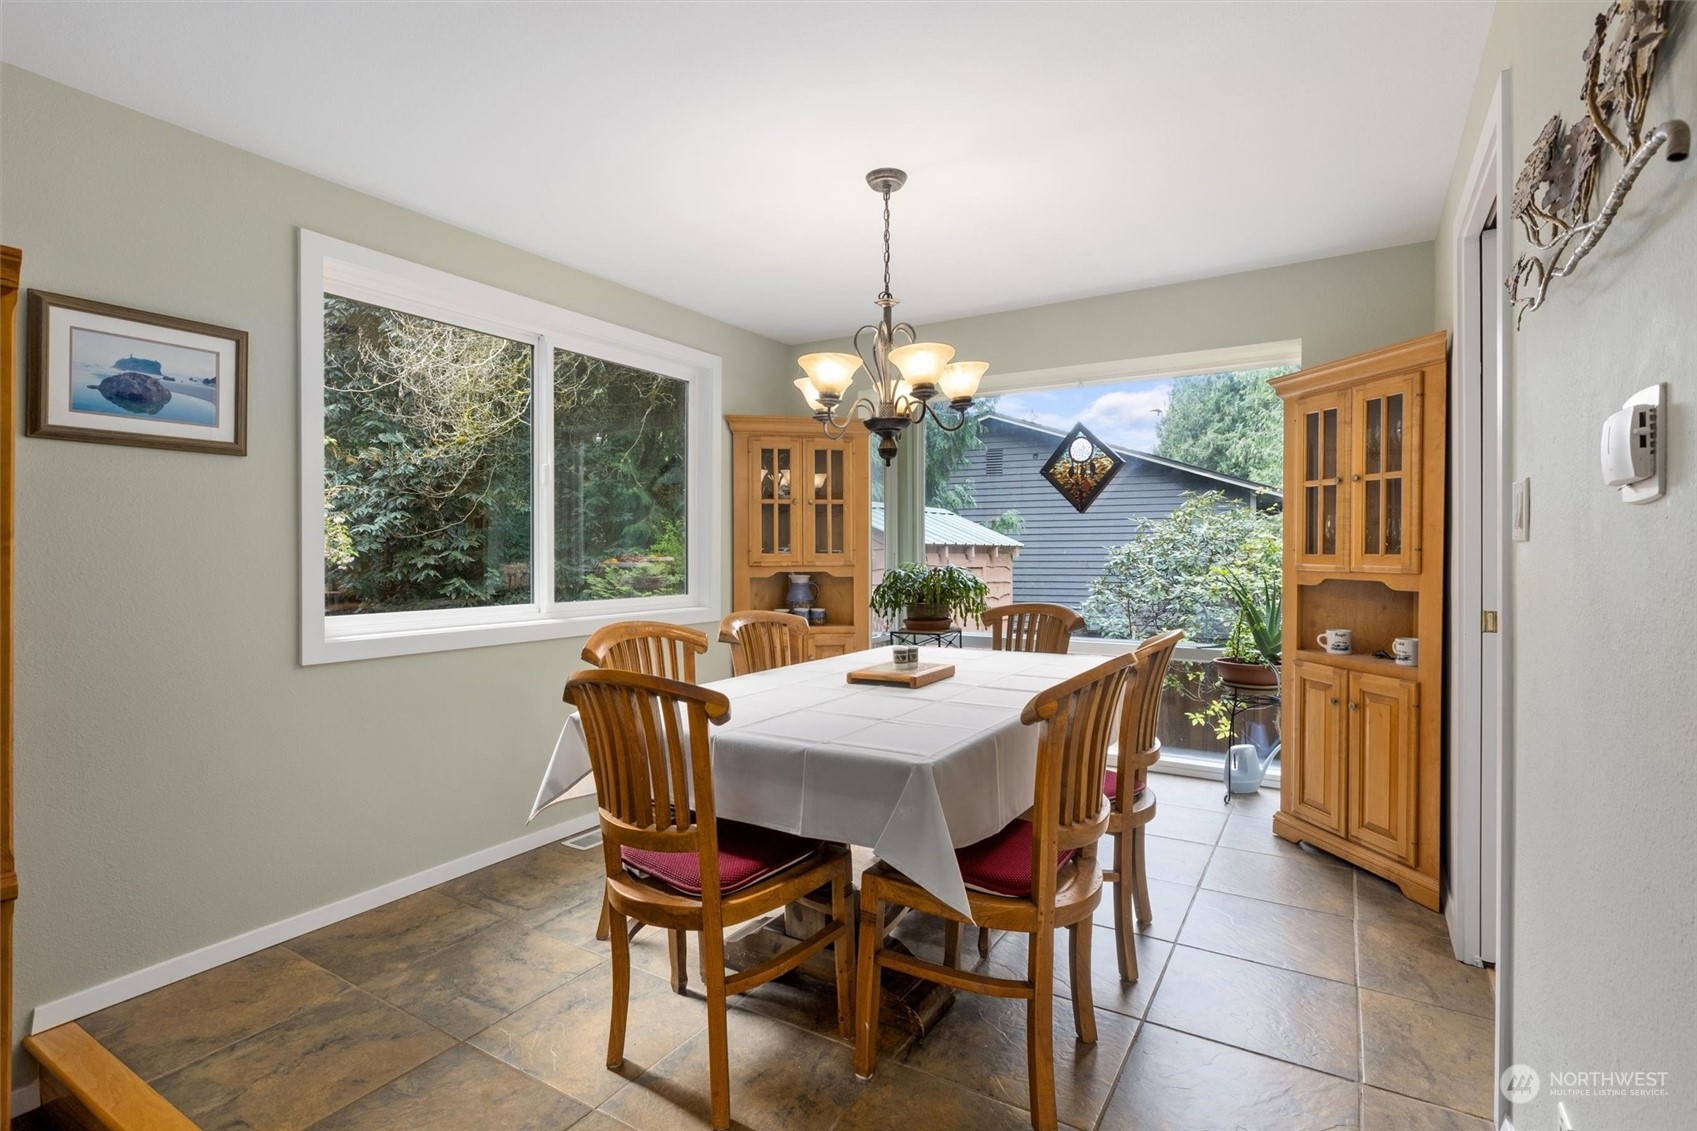 Sun-filled dining room with floor to ceiling atrium window, looking out to private yard, garden and wildlife at play.  Great space for anytime of the day.